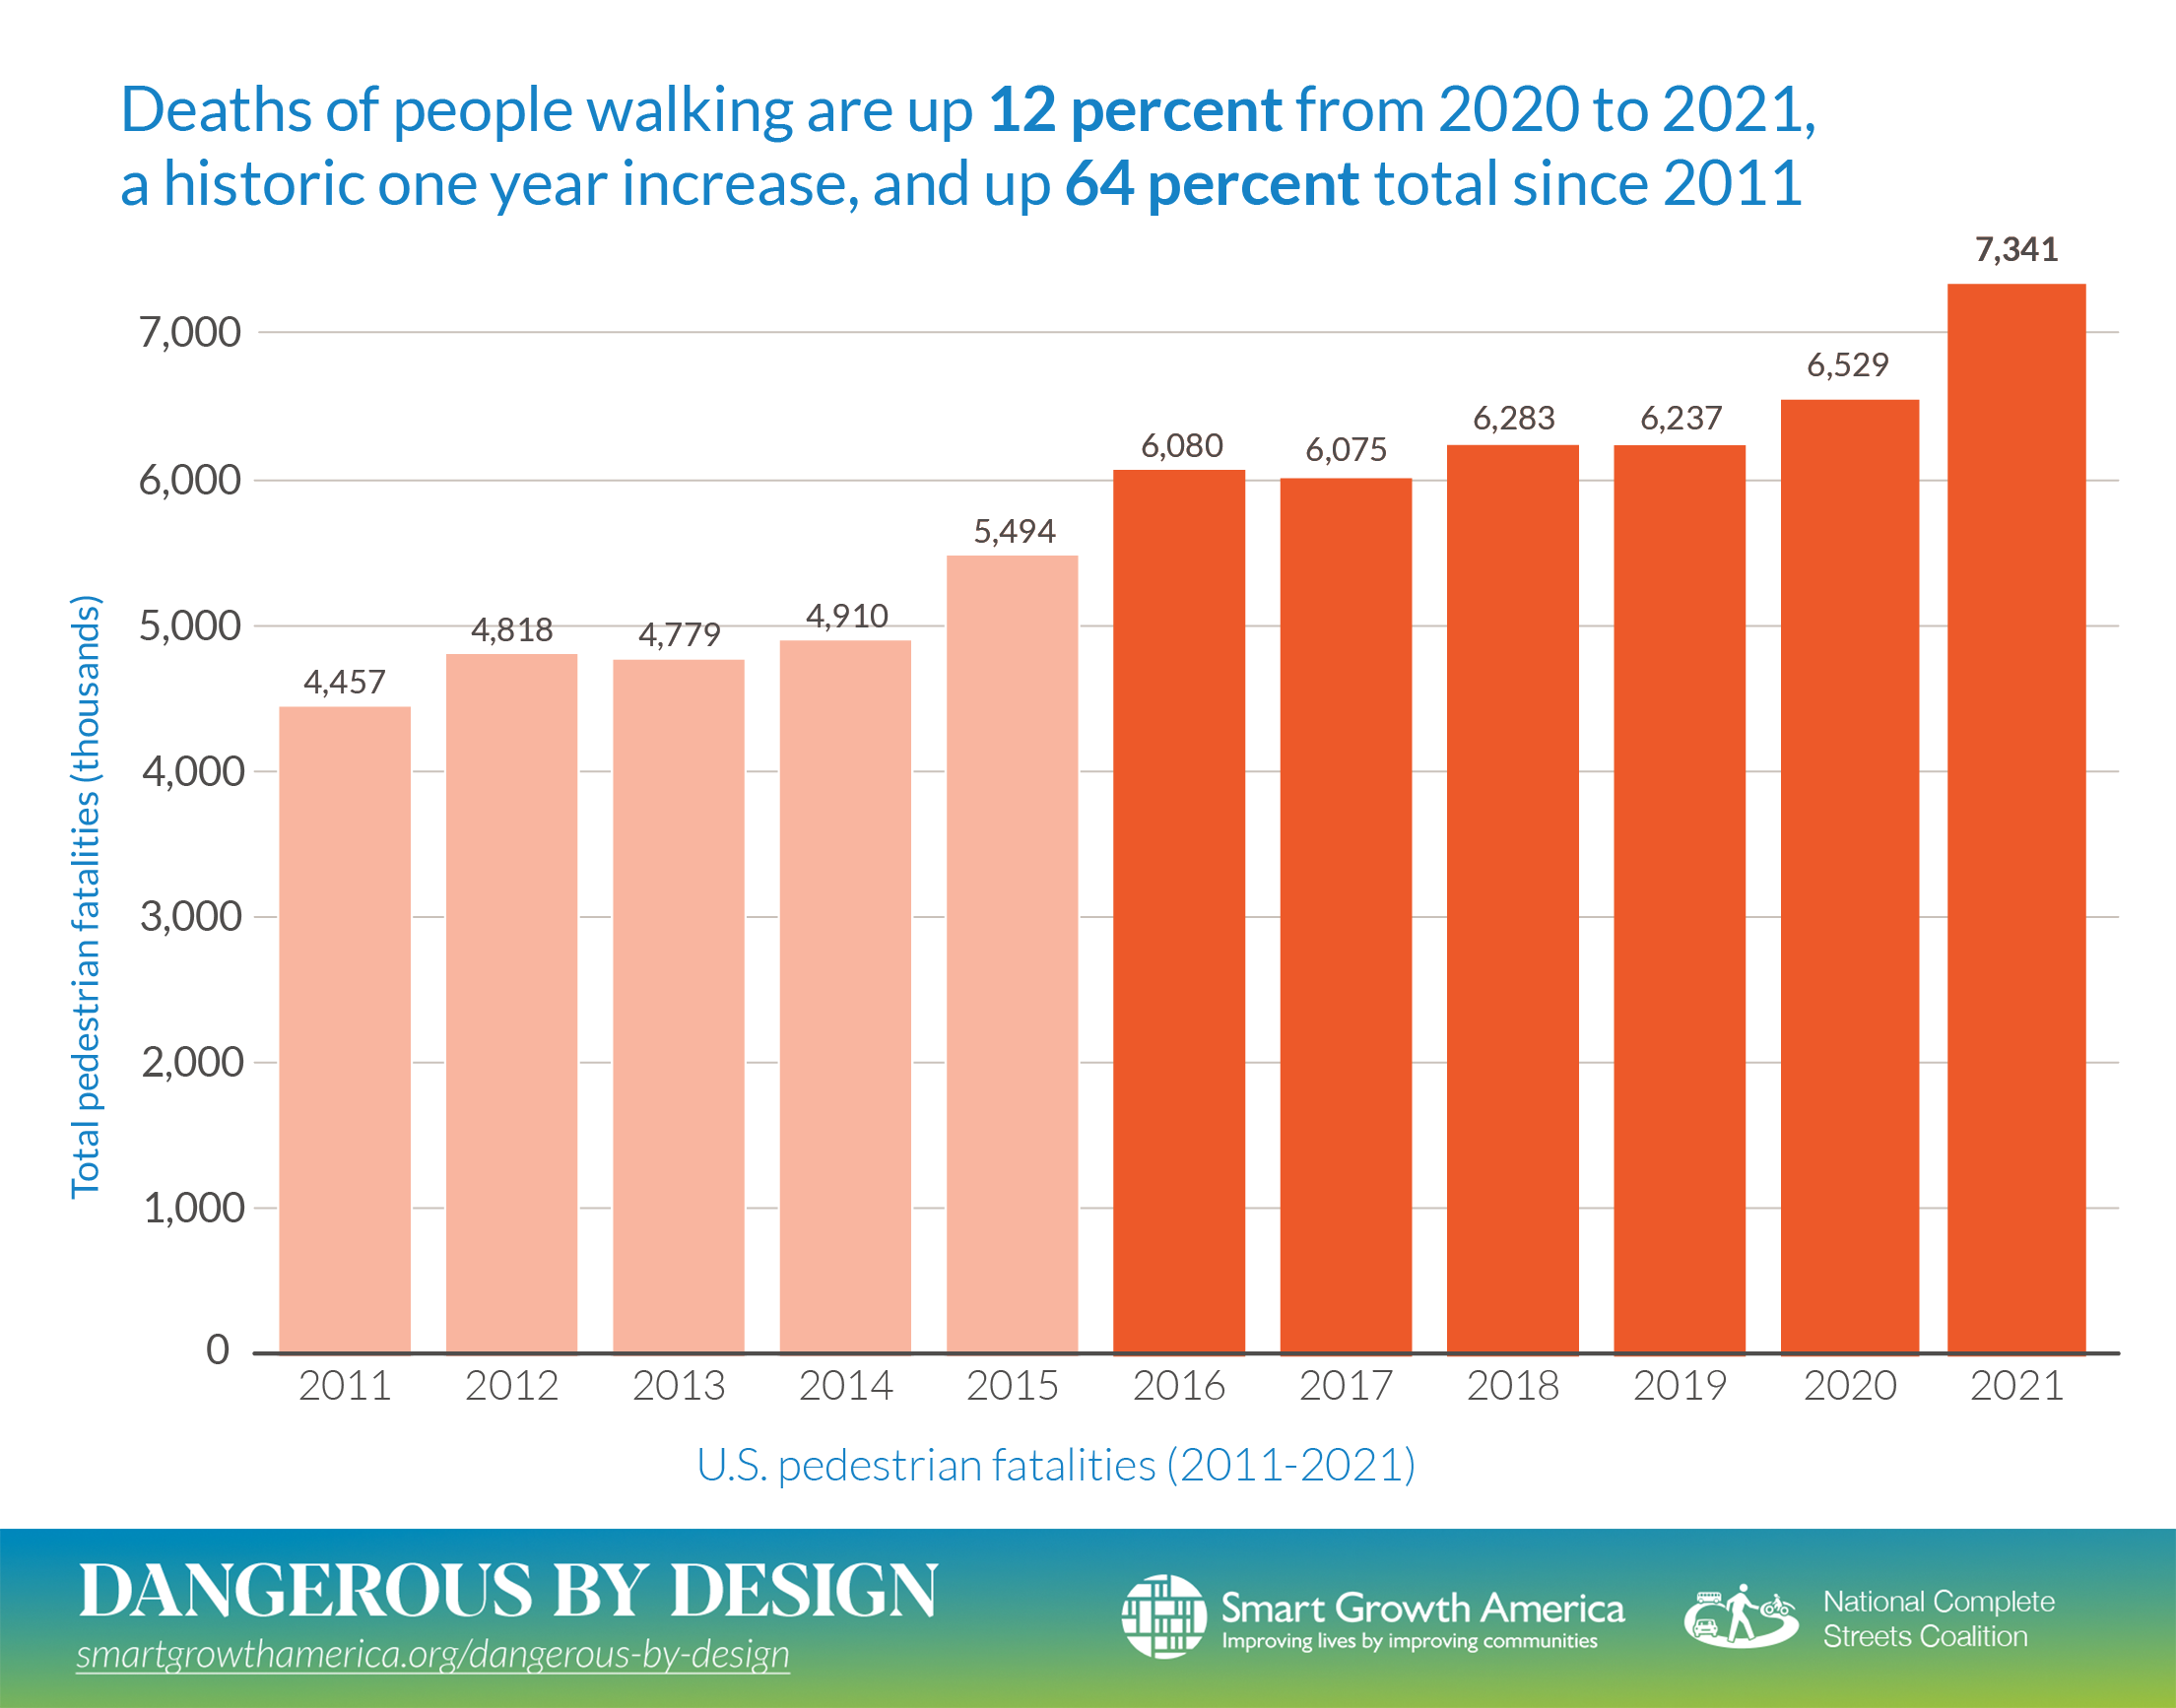 Far more people walking were struck and killed in 2021 than previously predicted